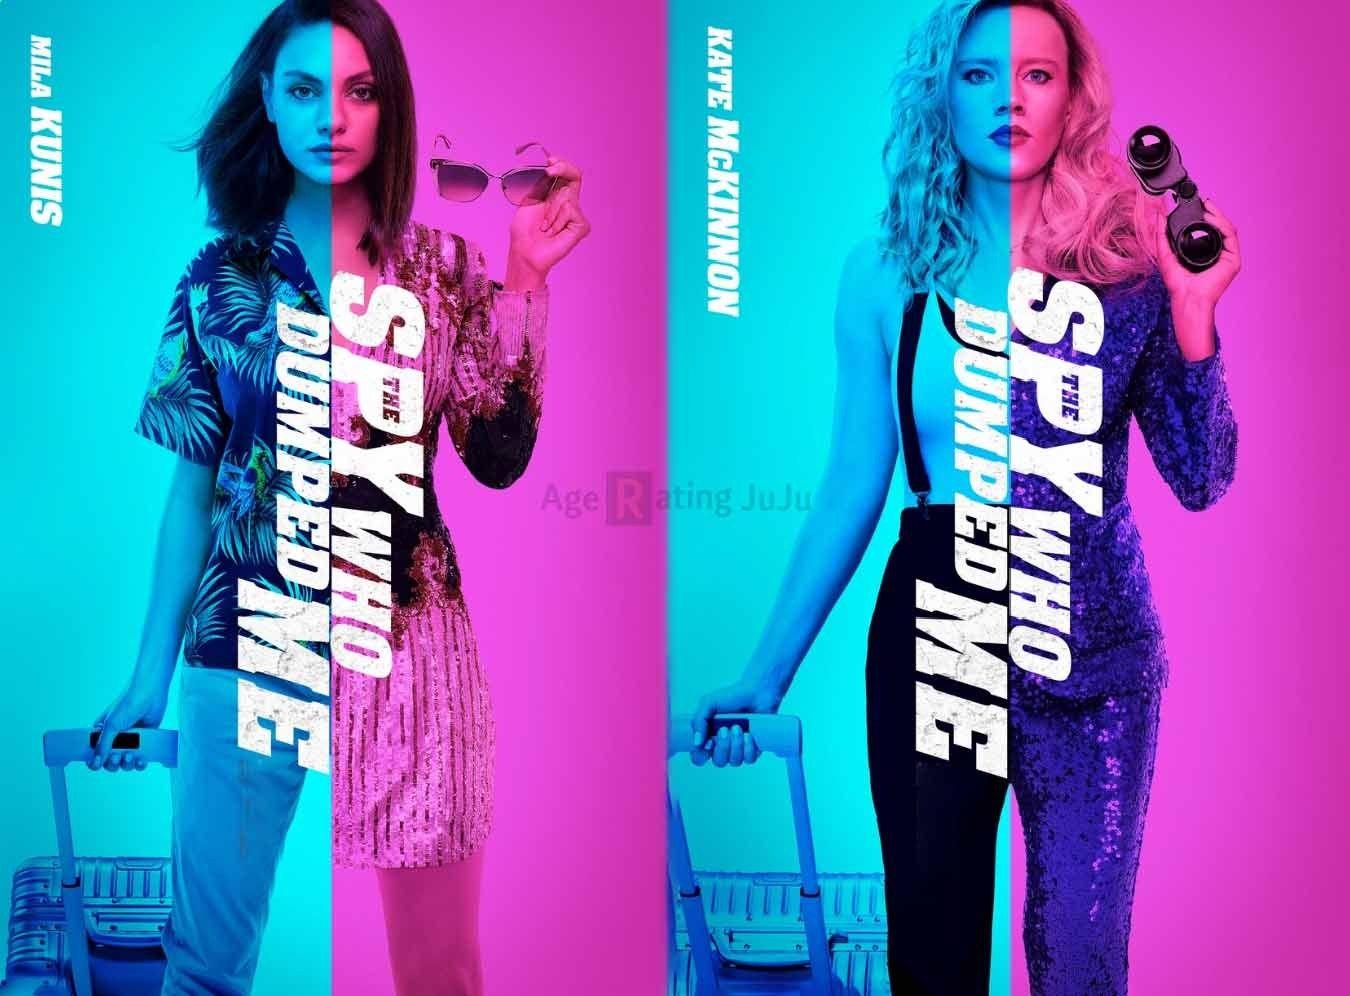 The Spy Who Dumped Me Age Rating 2018 Poster Image